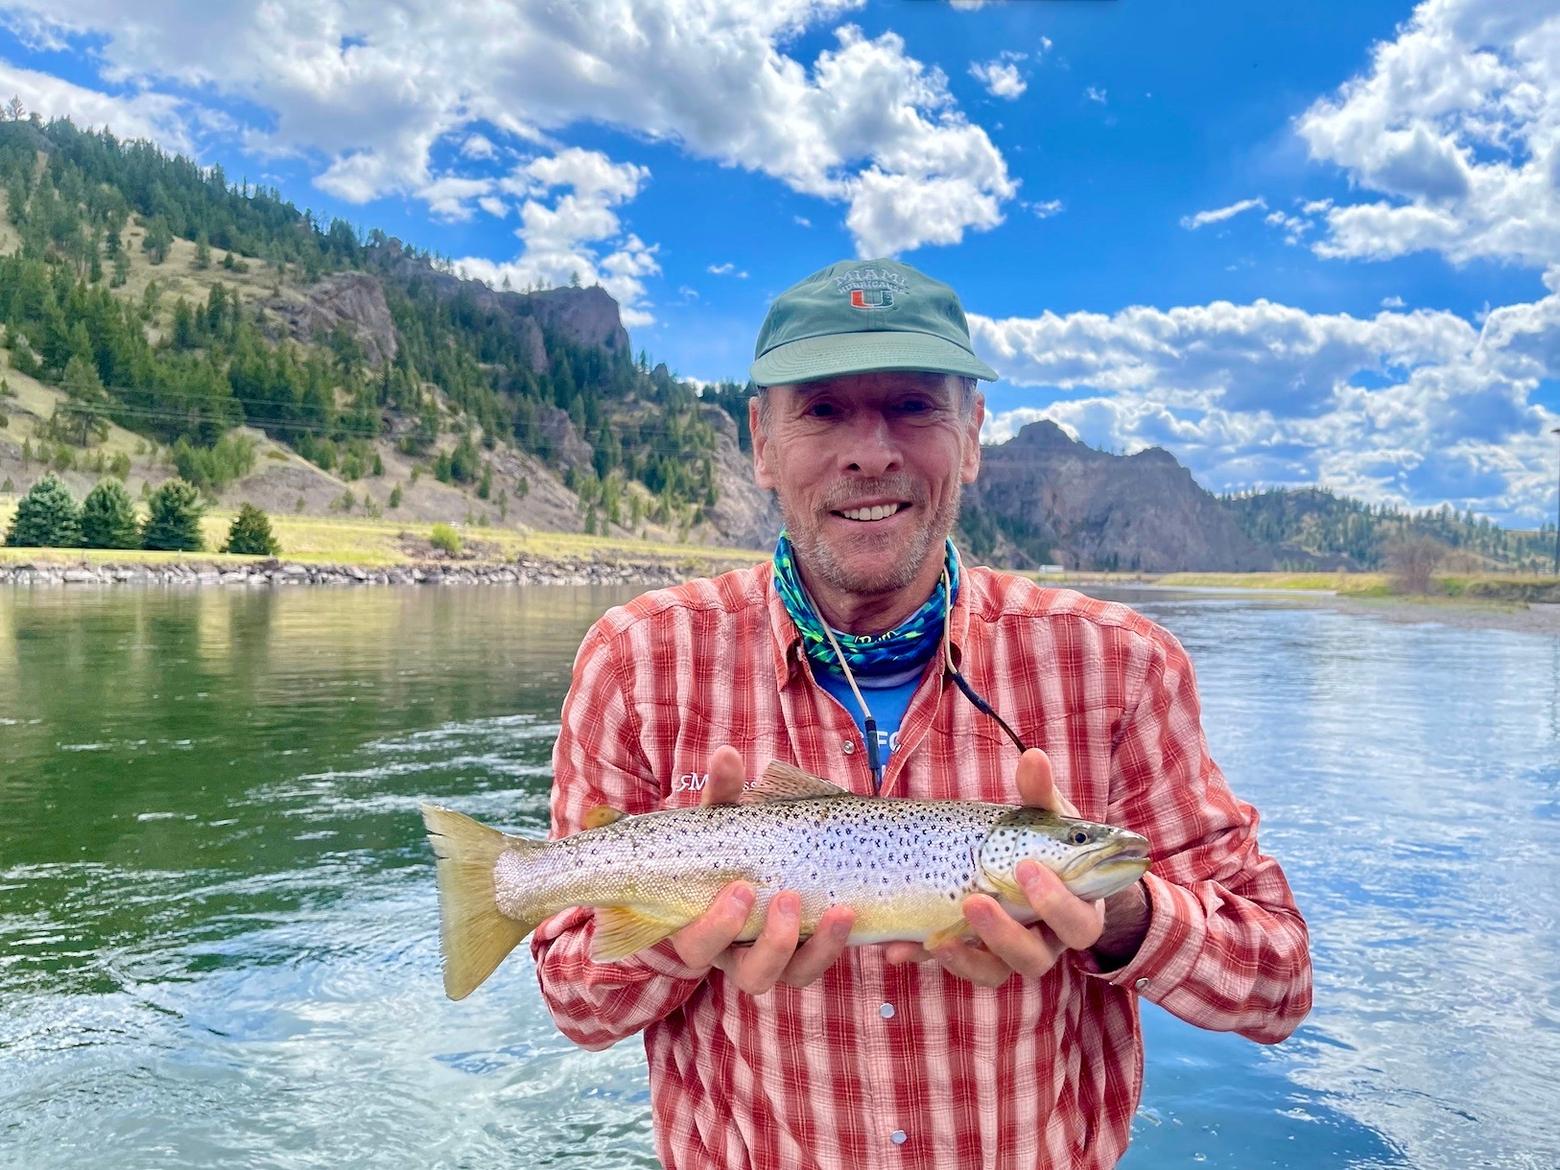 Besides helping Mountain Journal spread the word about threats to Greater Yellowstone and helping grassroots conservation, Tom Spruance says wealthy folk and developers need to stop sitting on the sidelines and give back by supporting land protection. Photo courtesy Thomas Spruance